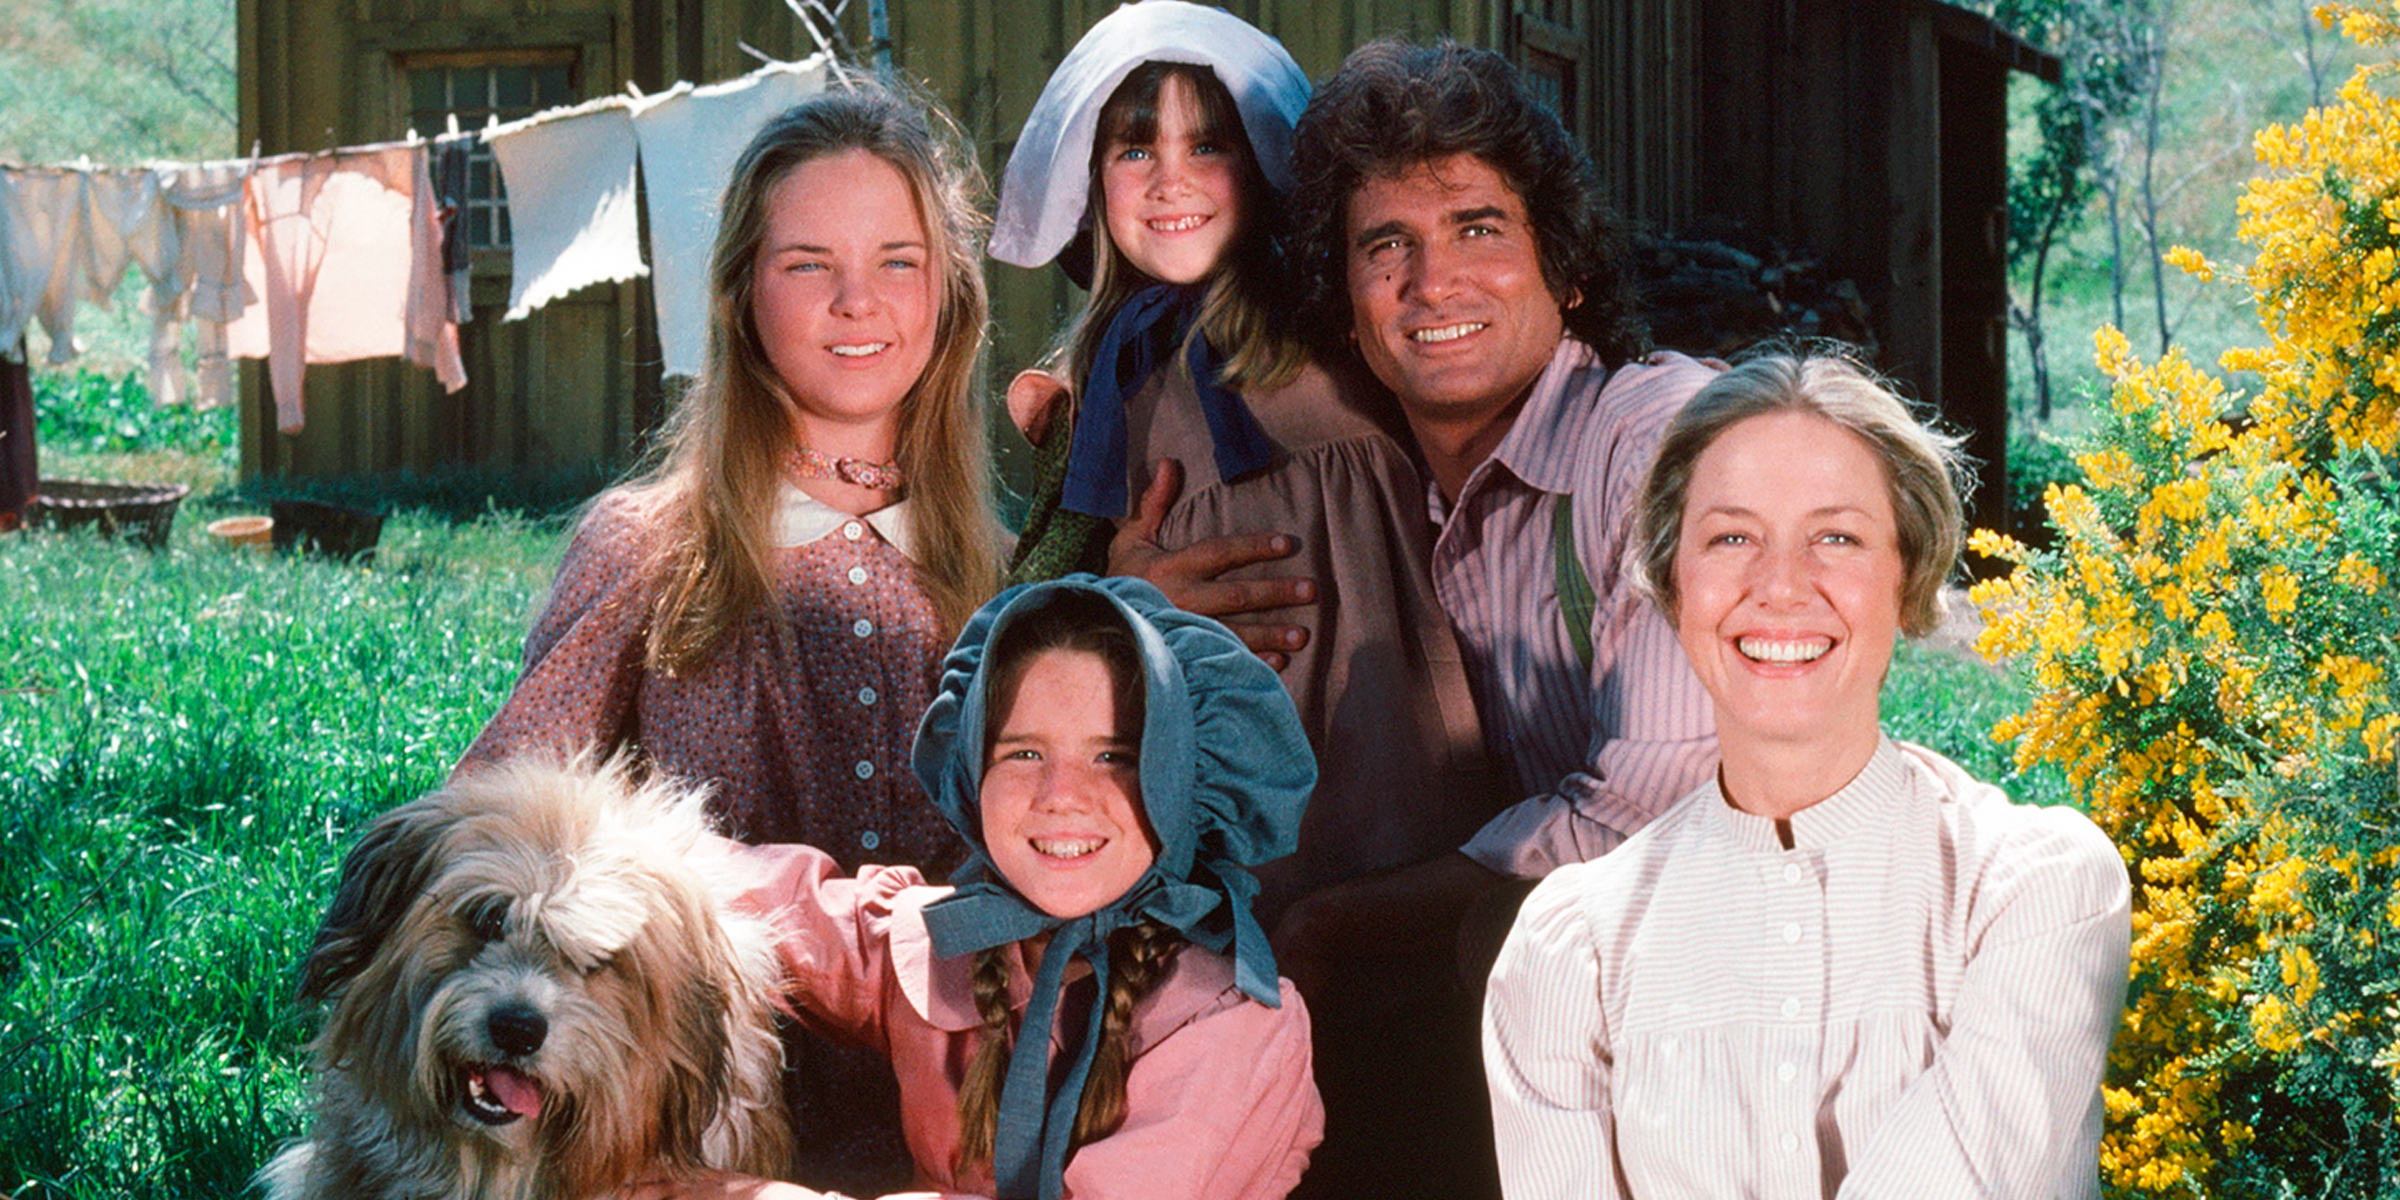 The cast of "Little House on the Prairie" | Source: Getty Images